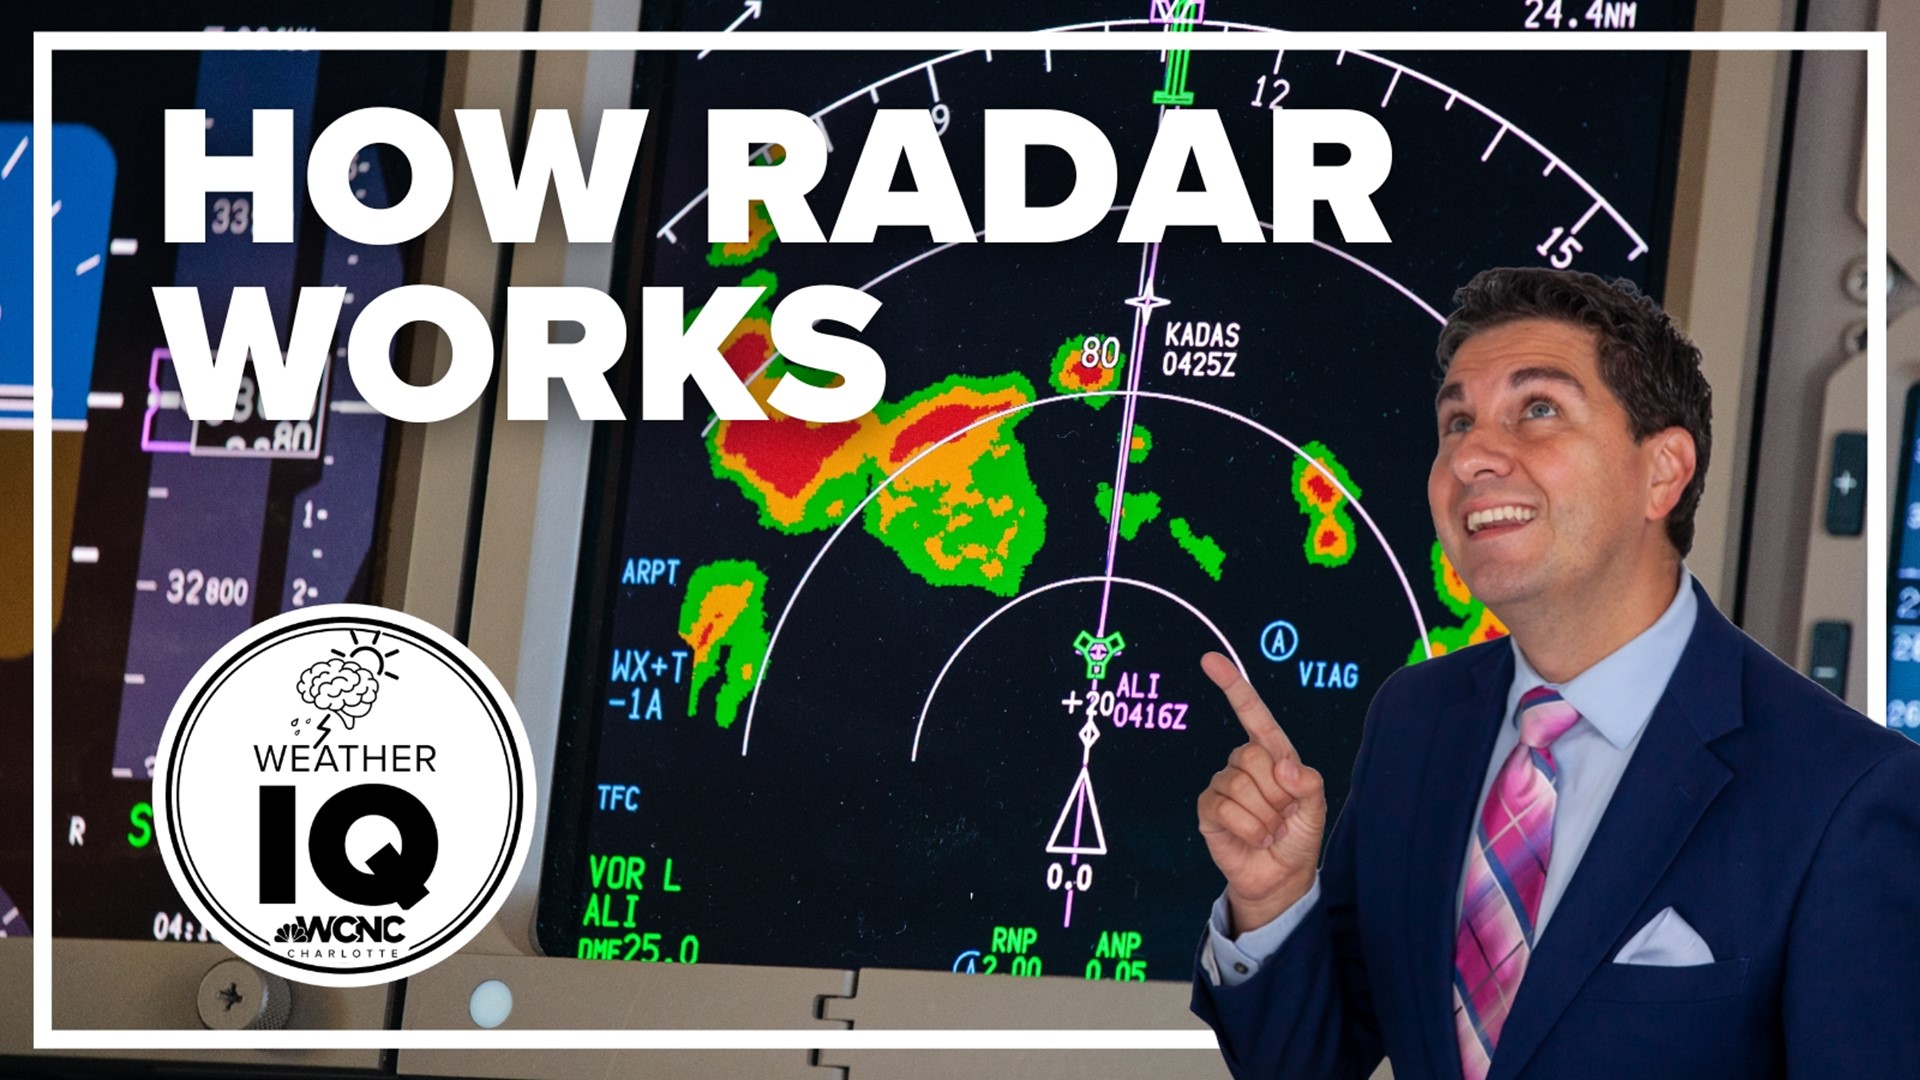 Radar is one of the most important tools used by Meteorologists. But how does it work?